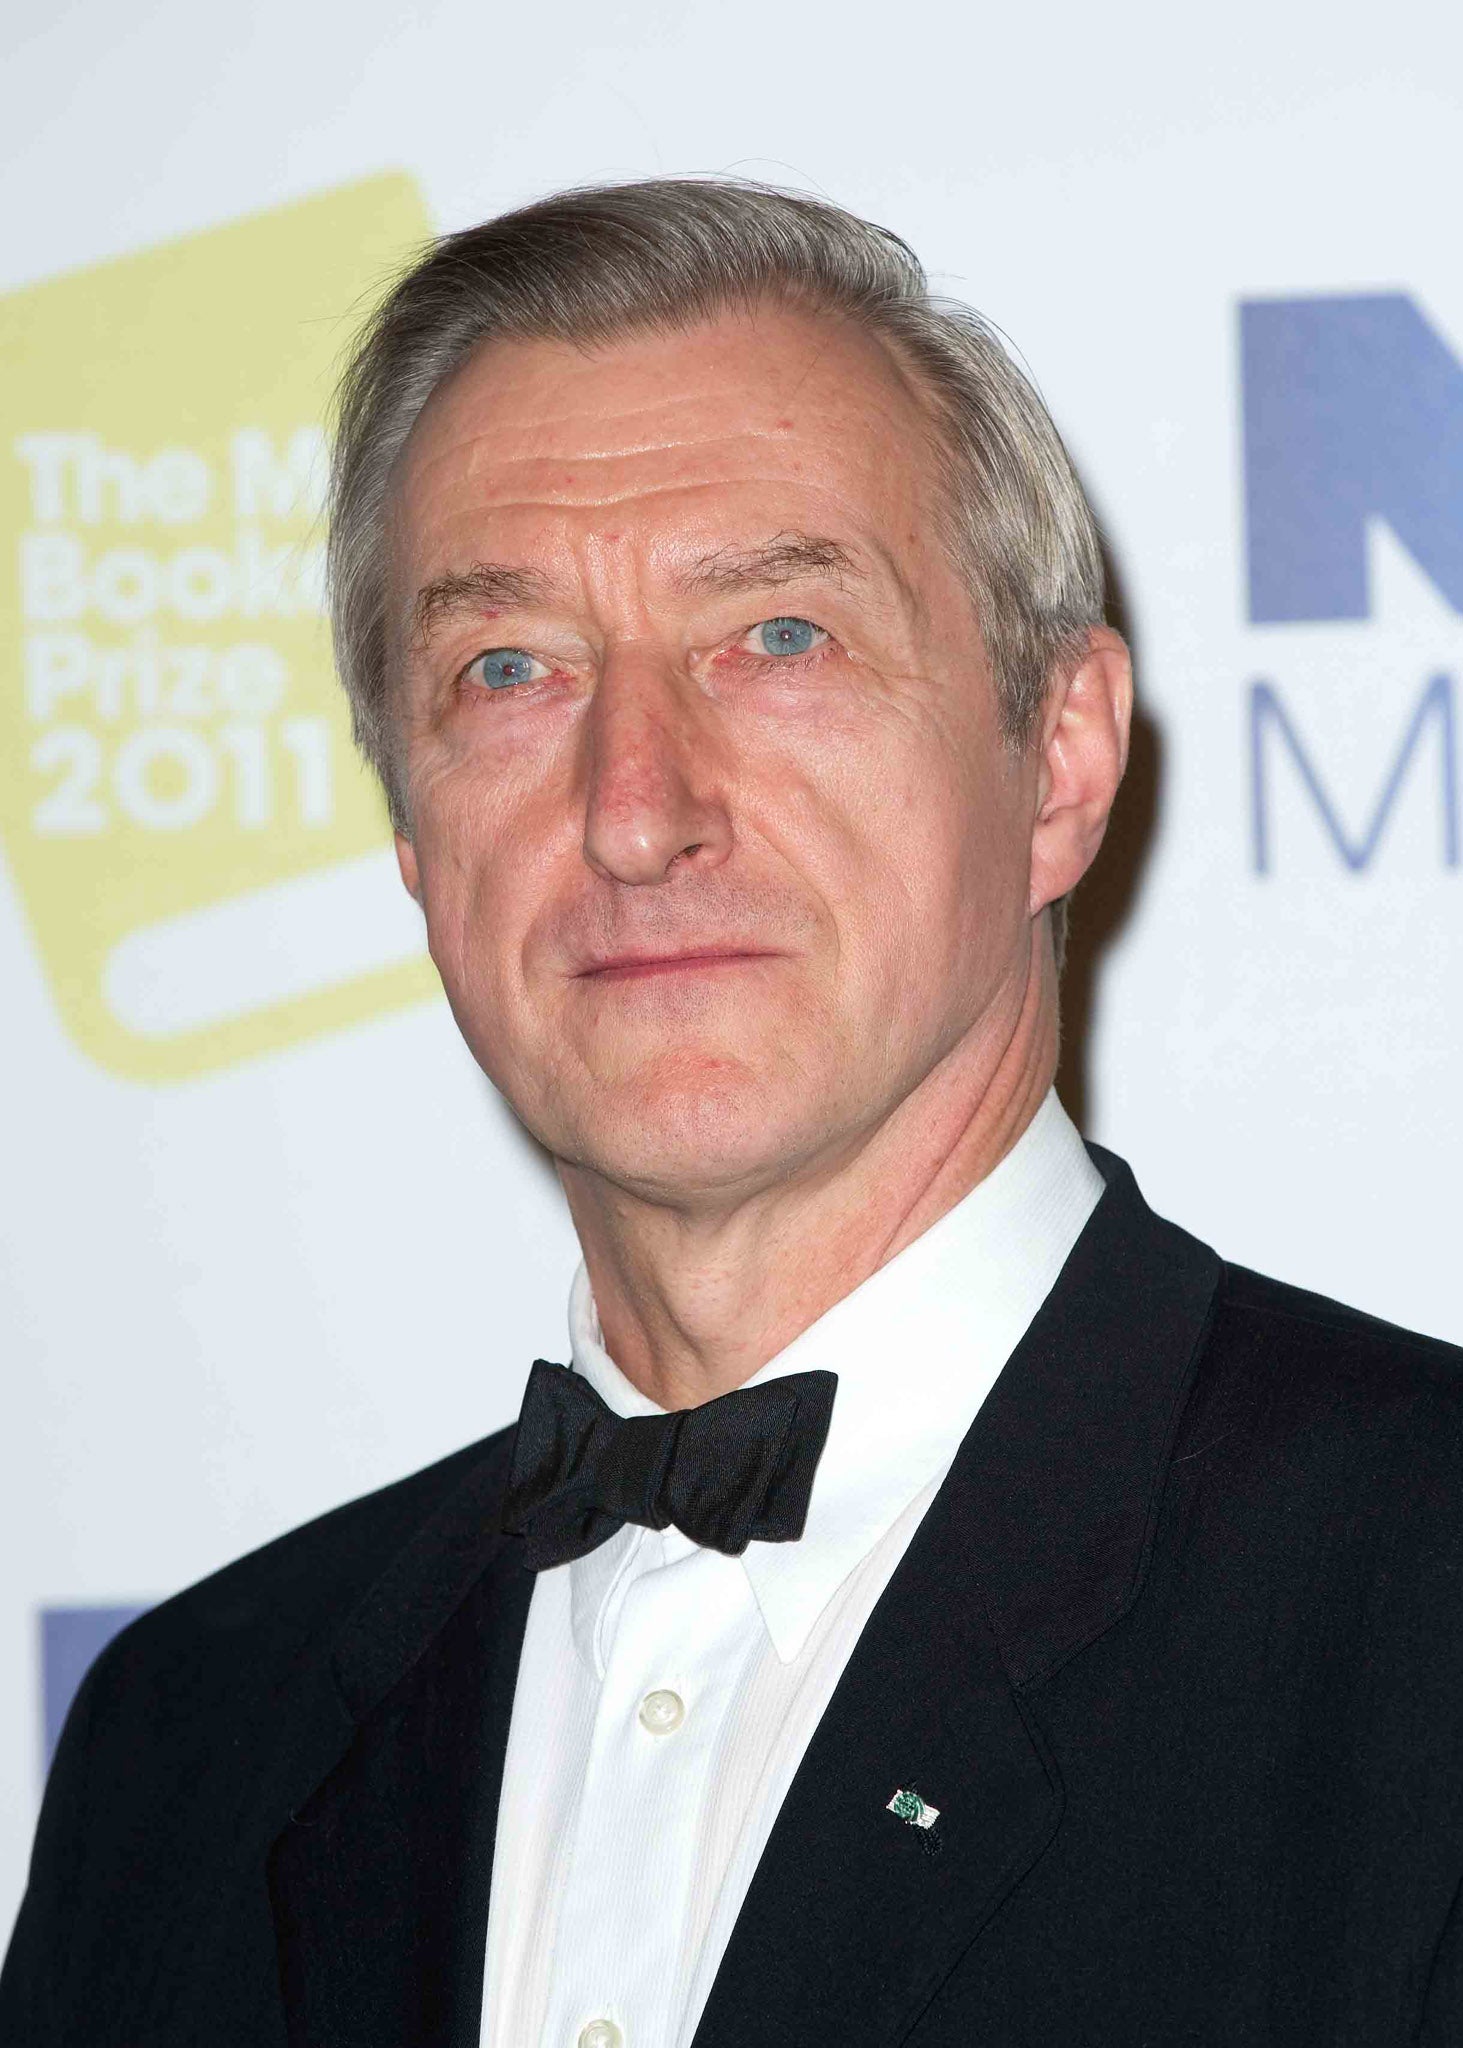 Julian Barnes says writing about sex is difficult